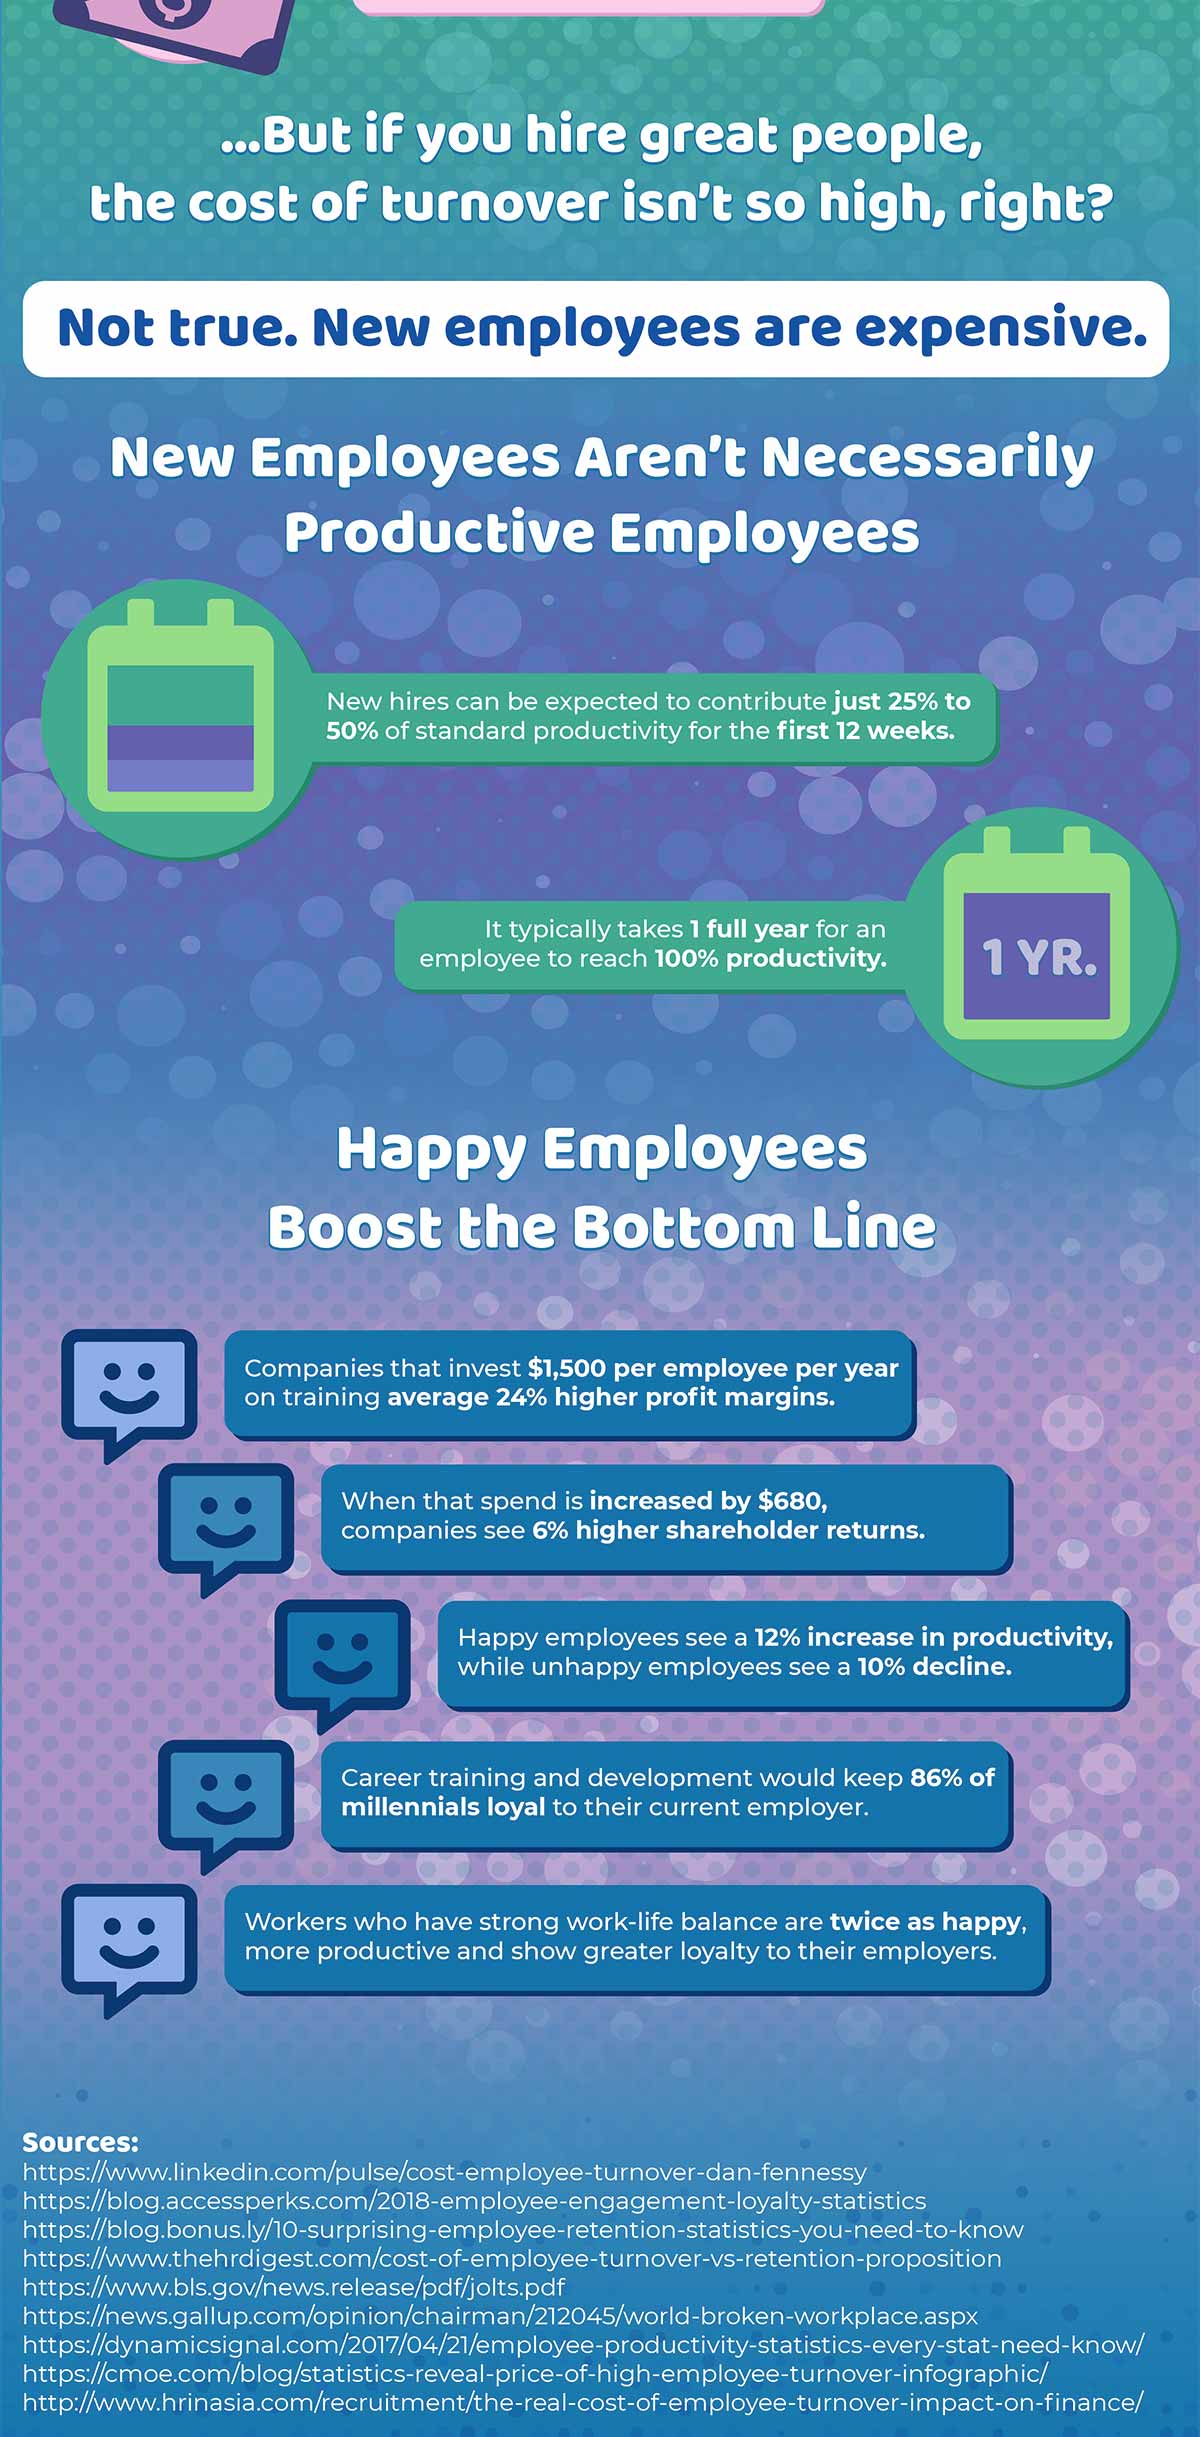 Employee Retention and Your Bottom Line